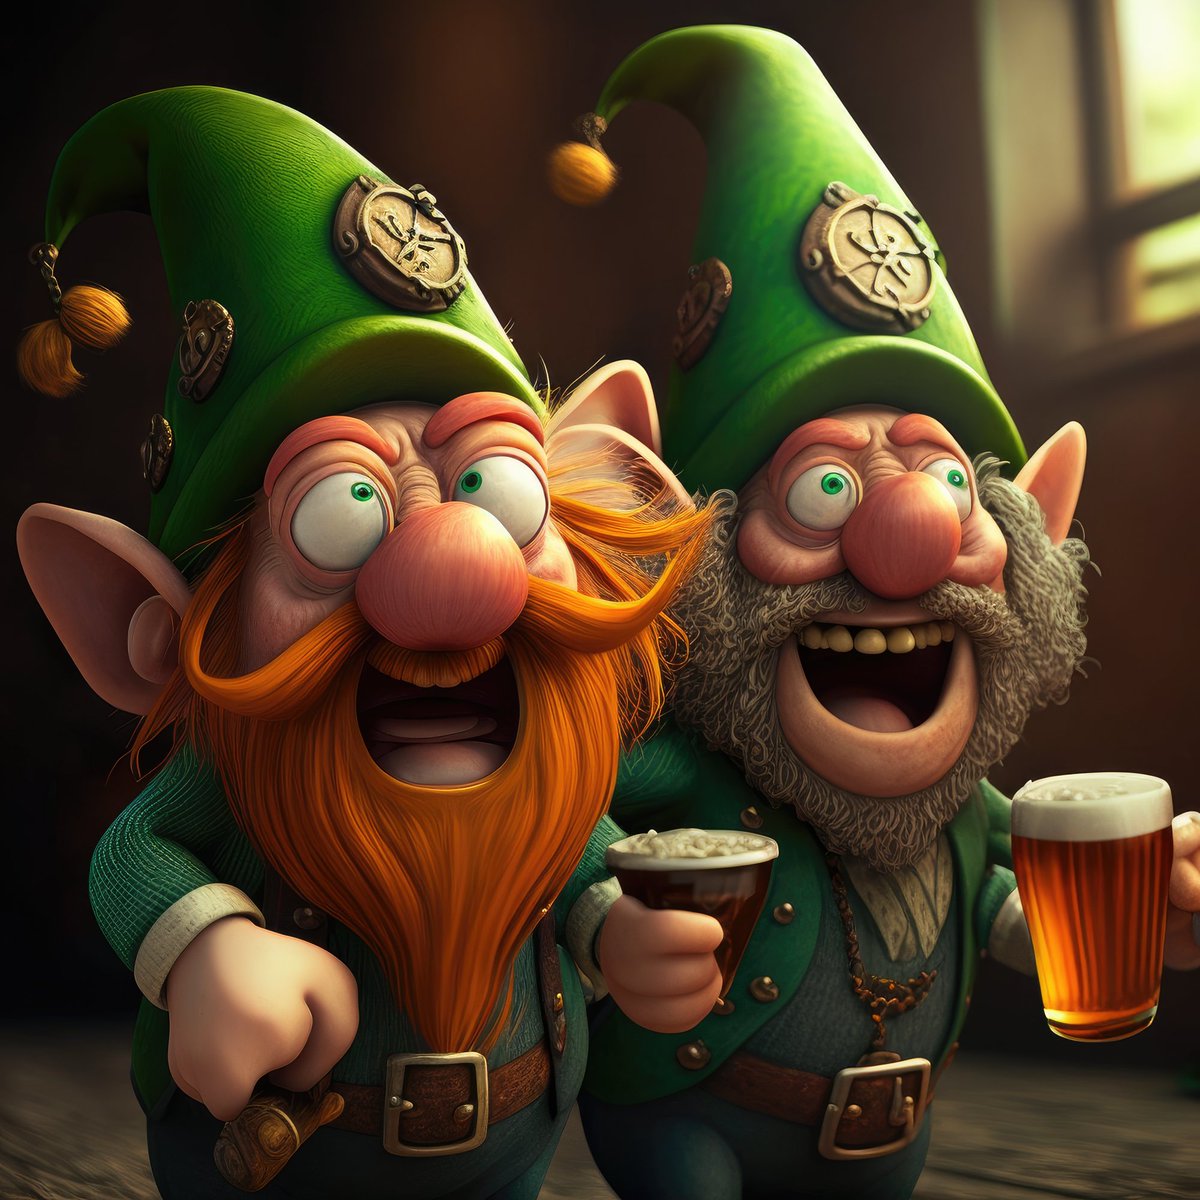 Zar and Gar 🍀

Mischievous leprechauns with hearts of gold! 

They're always stirring up a bit of playful trouble, but when someone's in need, they're there in a flash. 

Their mischievous ways bring joy, and their kind hearts ensure help is never far away. ✨
#LeprechaunArmy 🍻